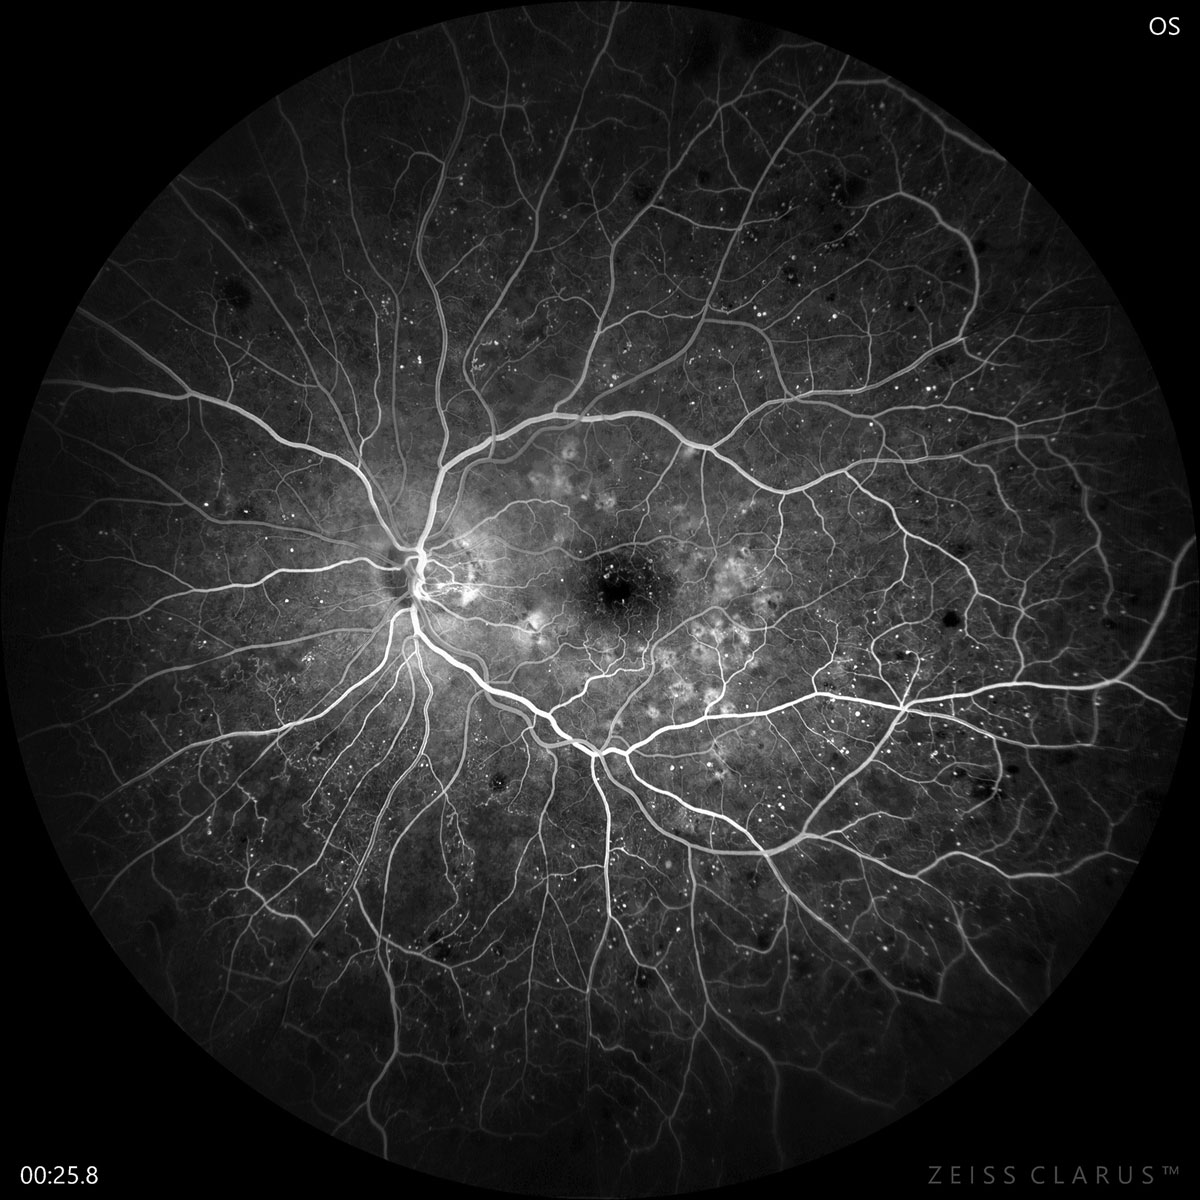 Diabetic retinopathy may present in nearly half of diabetics, especially those who are overweight, obese, or don't exercise.